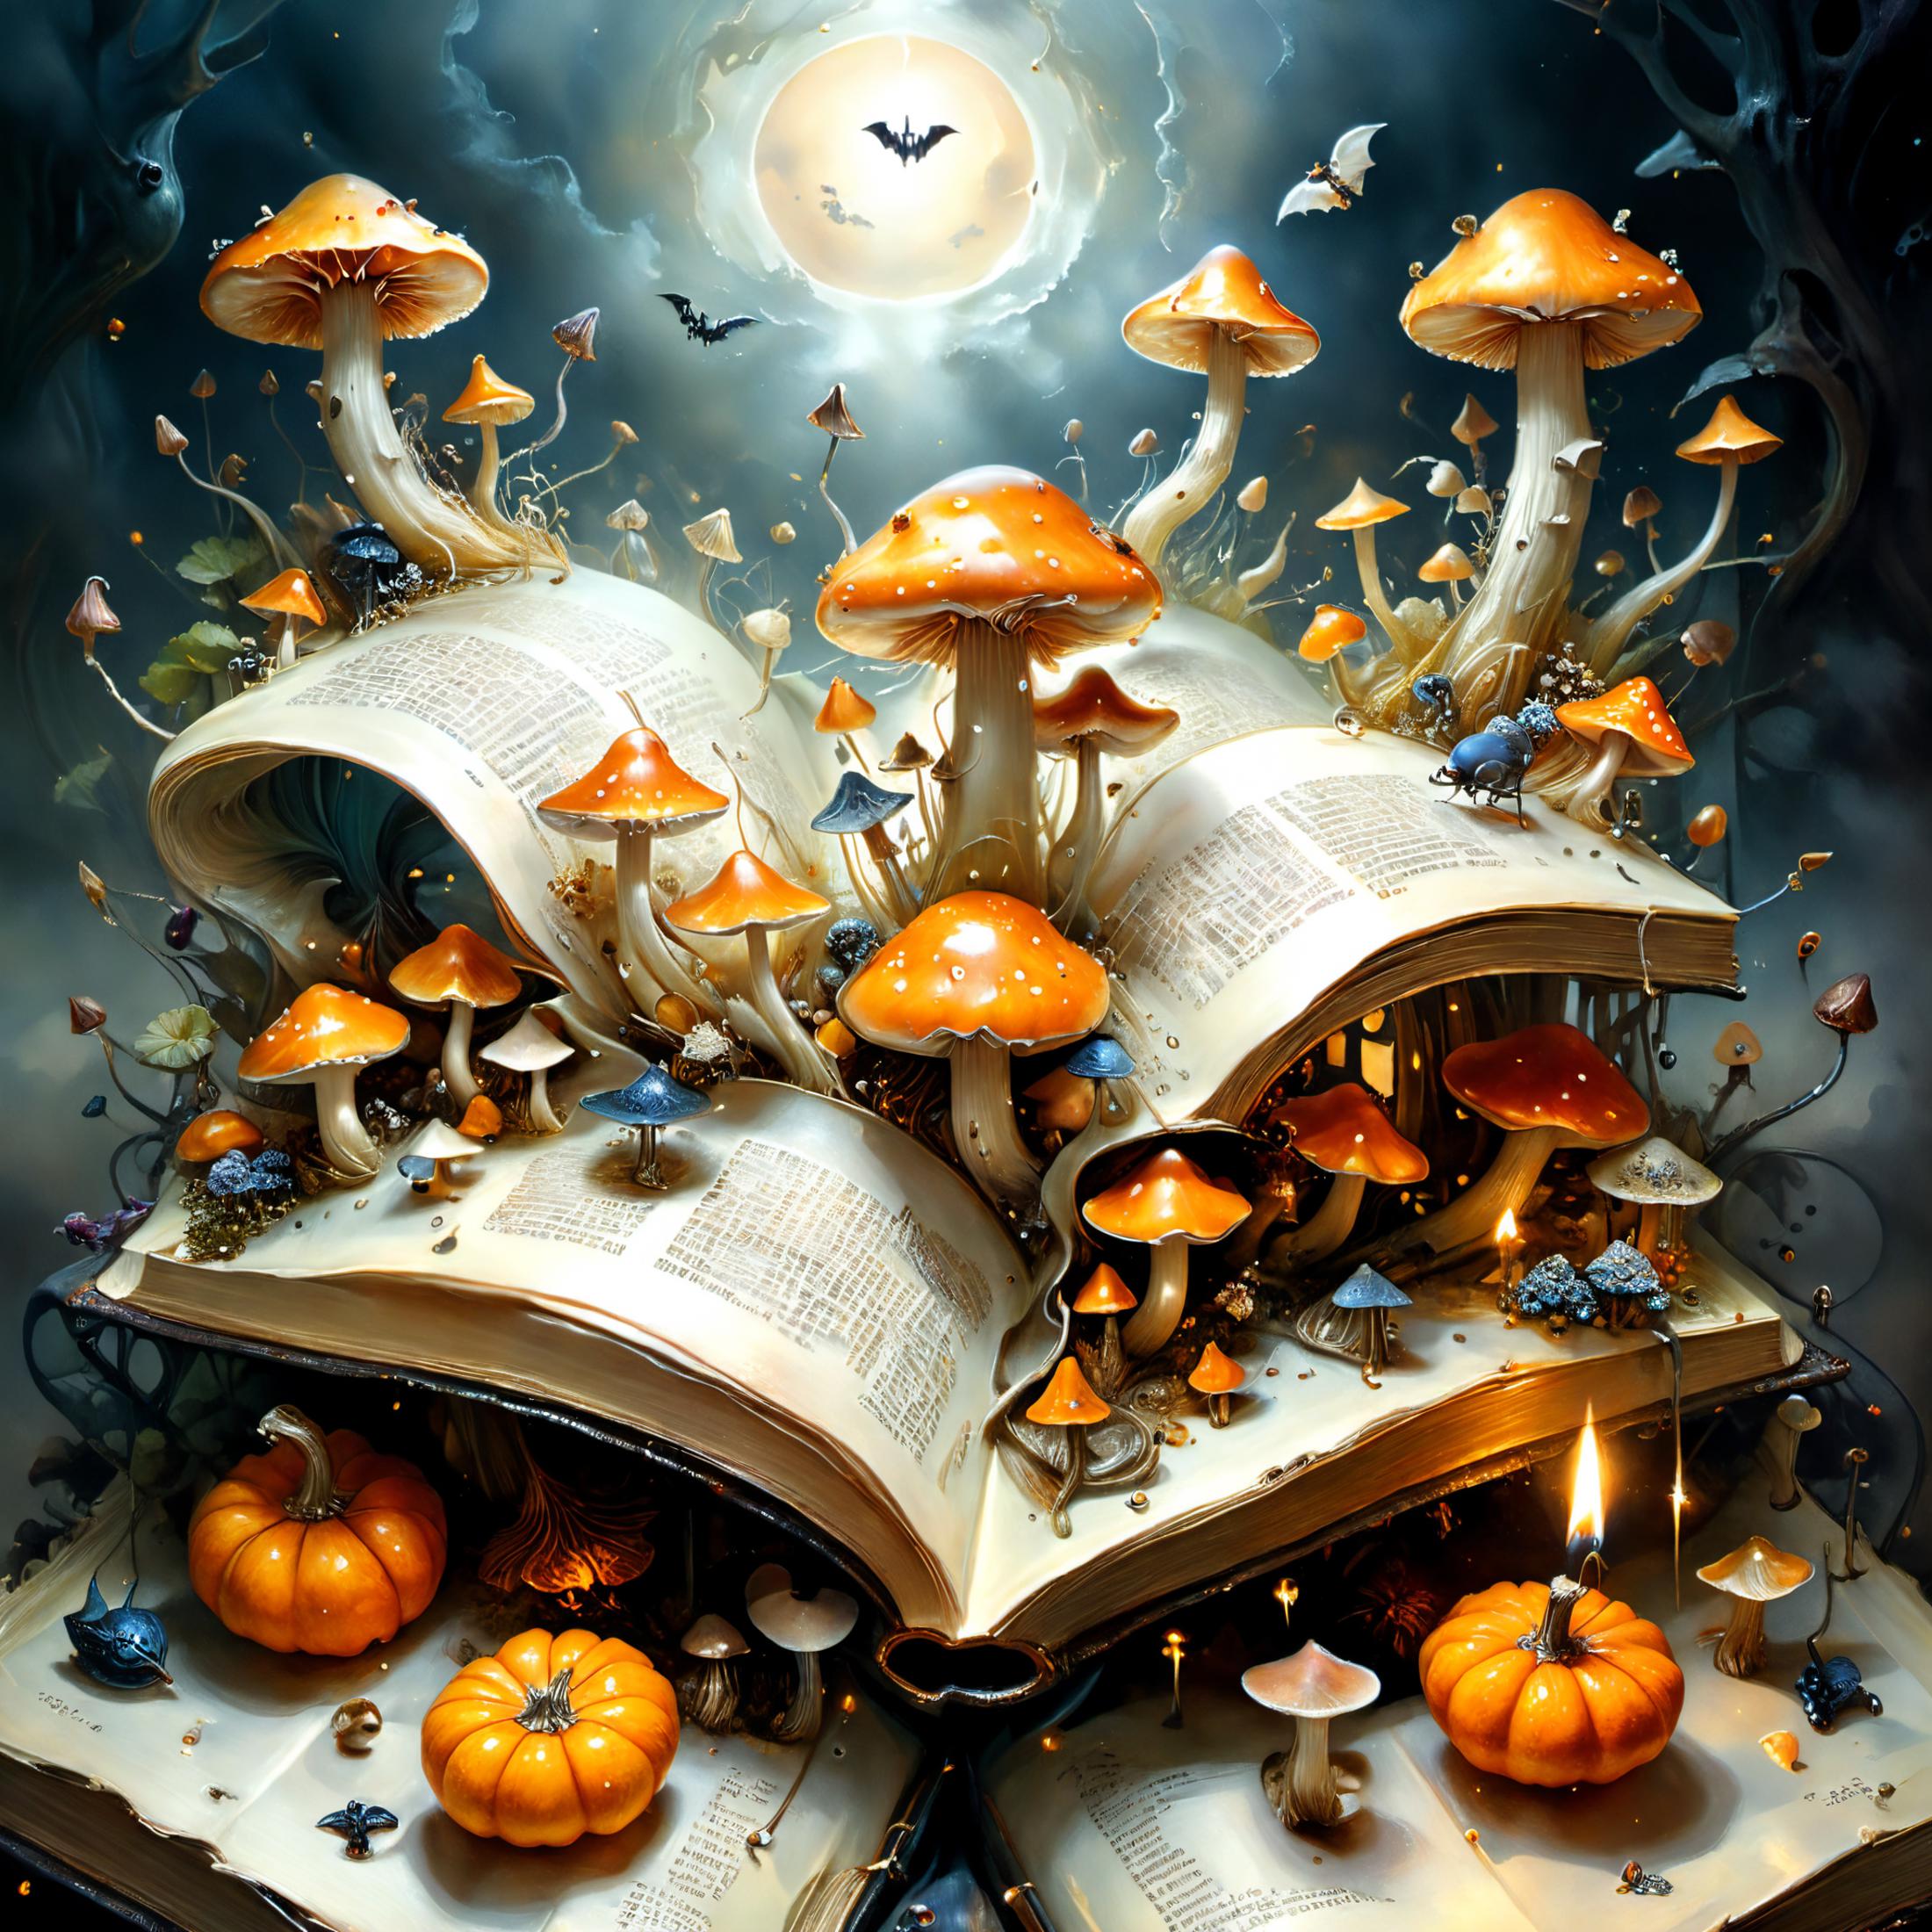 Artistic Illustration of a Fantasy Scene with Books, Mushrooms, and Pumpkins